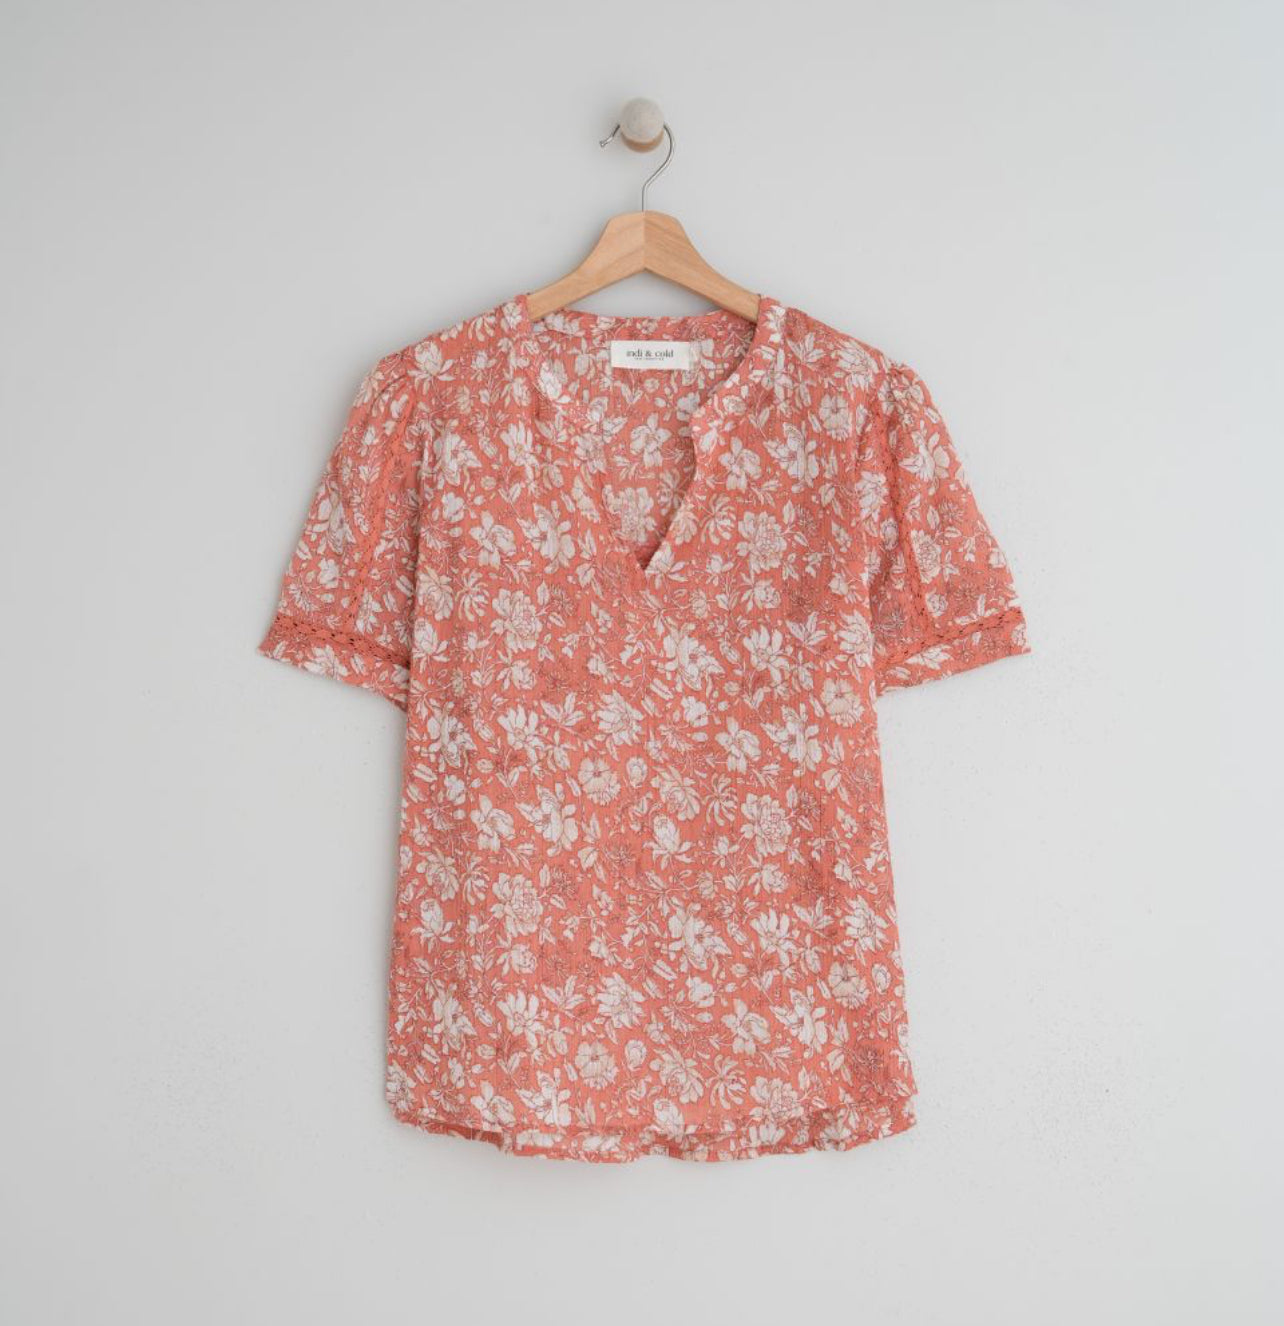 Detailed Floral Sleeve Shirt